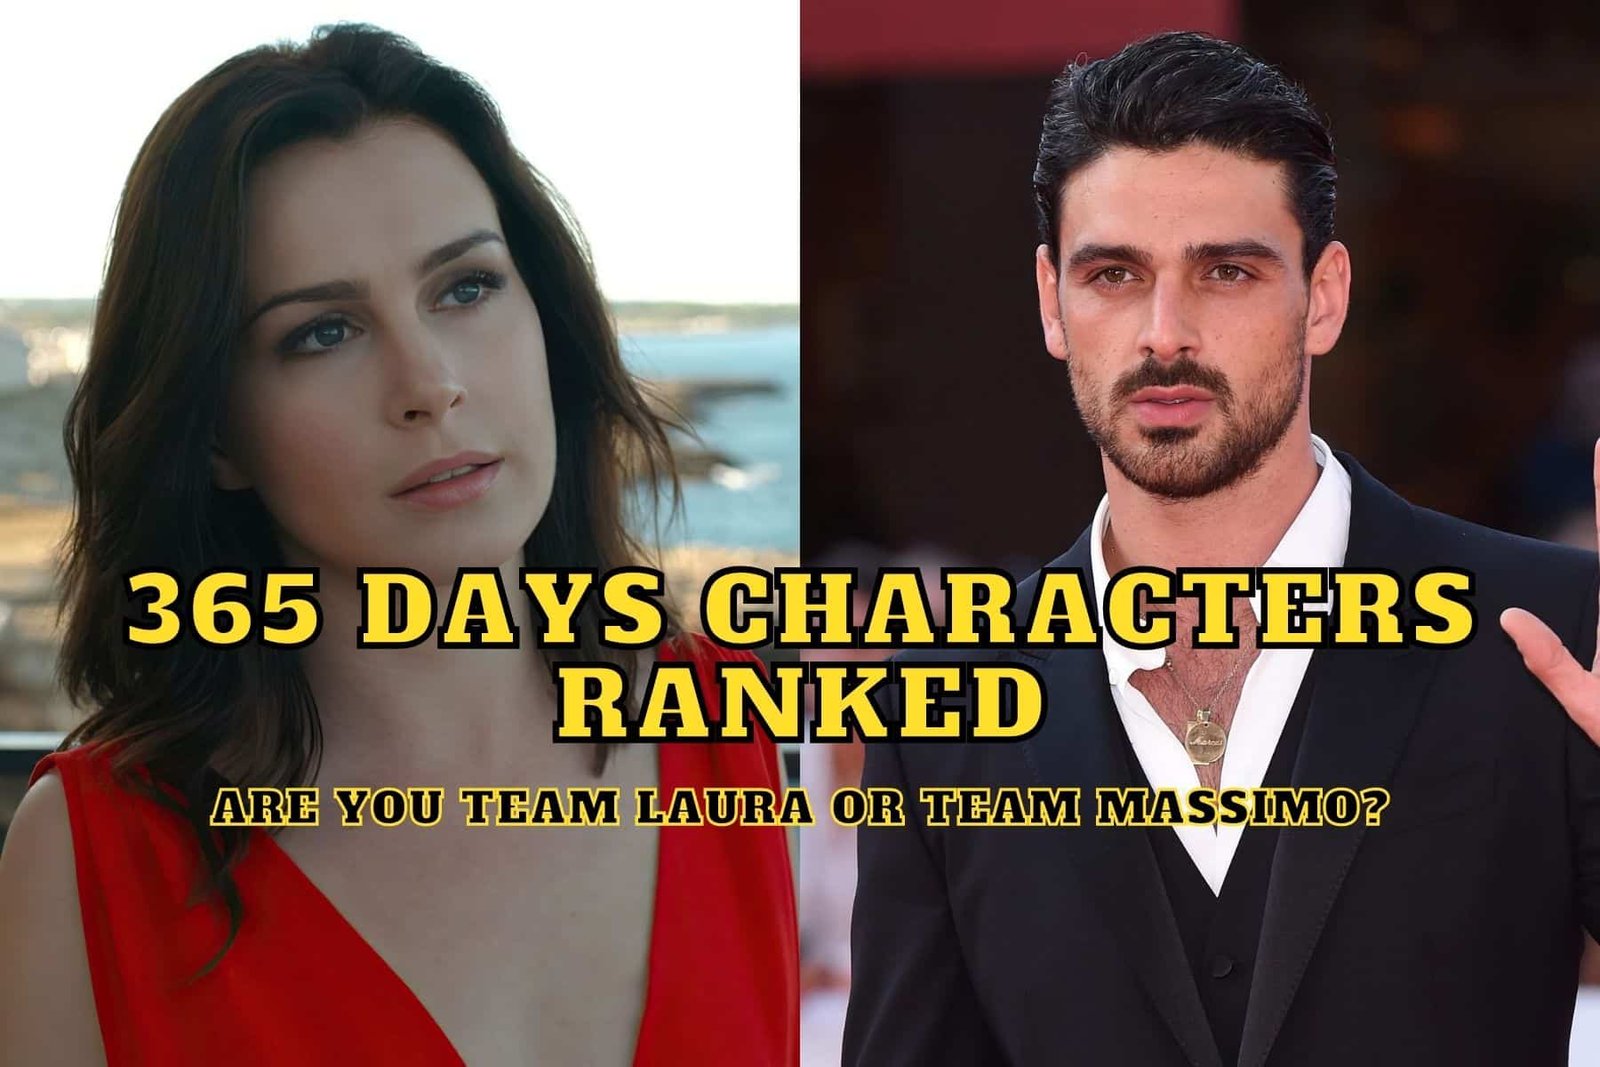 365 Days Characters Ranked - Are you Team Laura or Massimo?